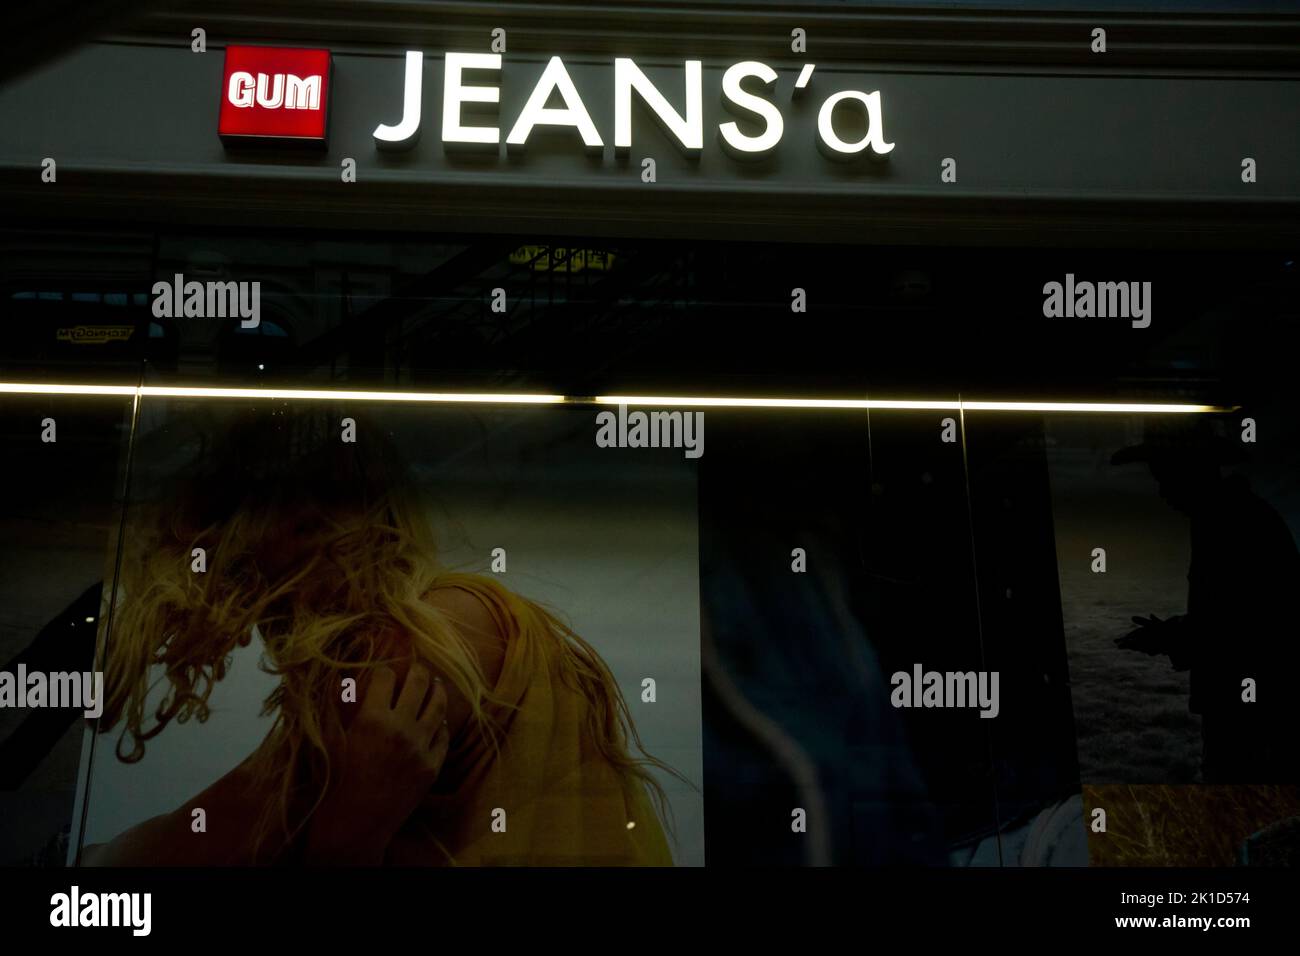 Moscow, Russia. 17th of September, 2022. The logo 'Jeans'a' is seen outside a rebranded former Levi's jeans store at the GUM shopping arcade. Levi's has pulled out of Russia, while its former Russian stores have reopened under the new brand name of Jeans'a Stock Photo